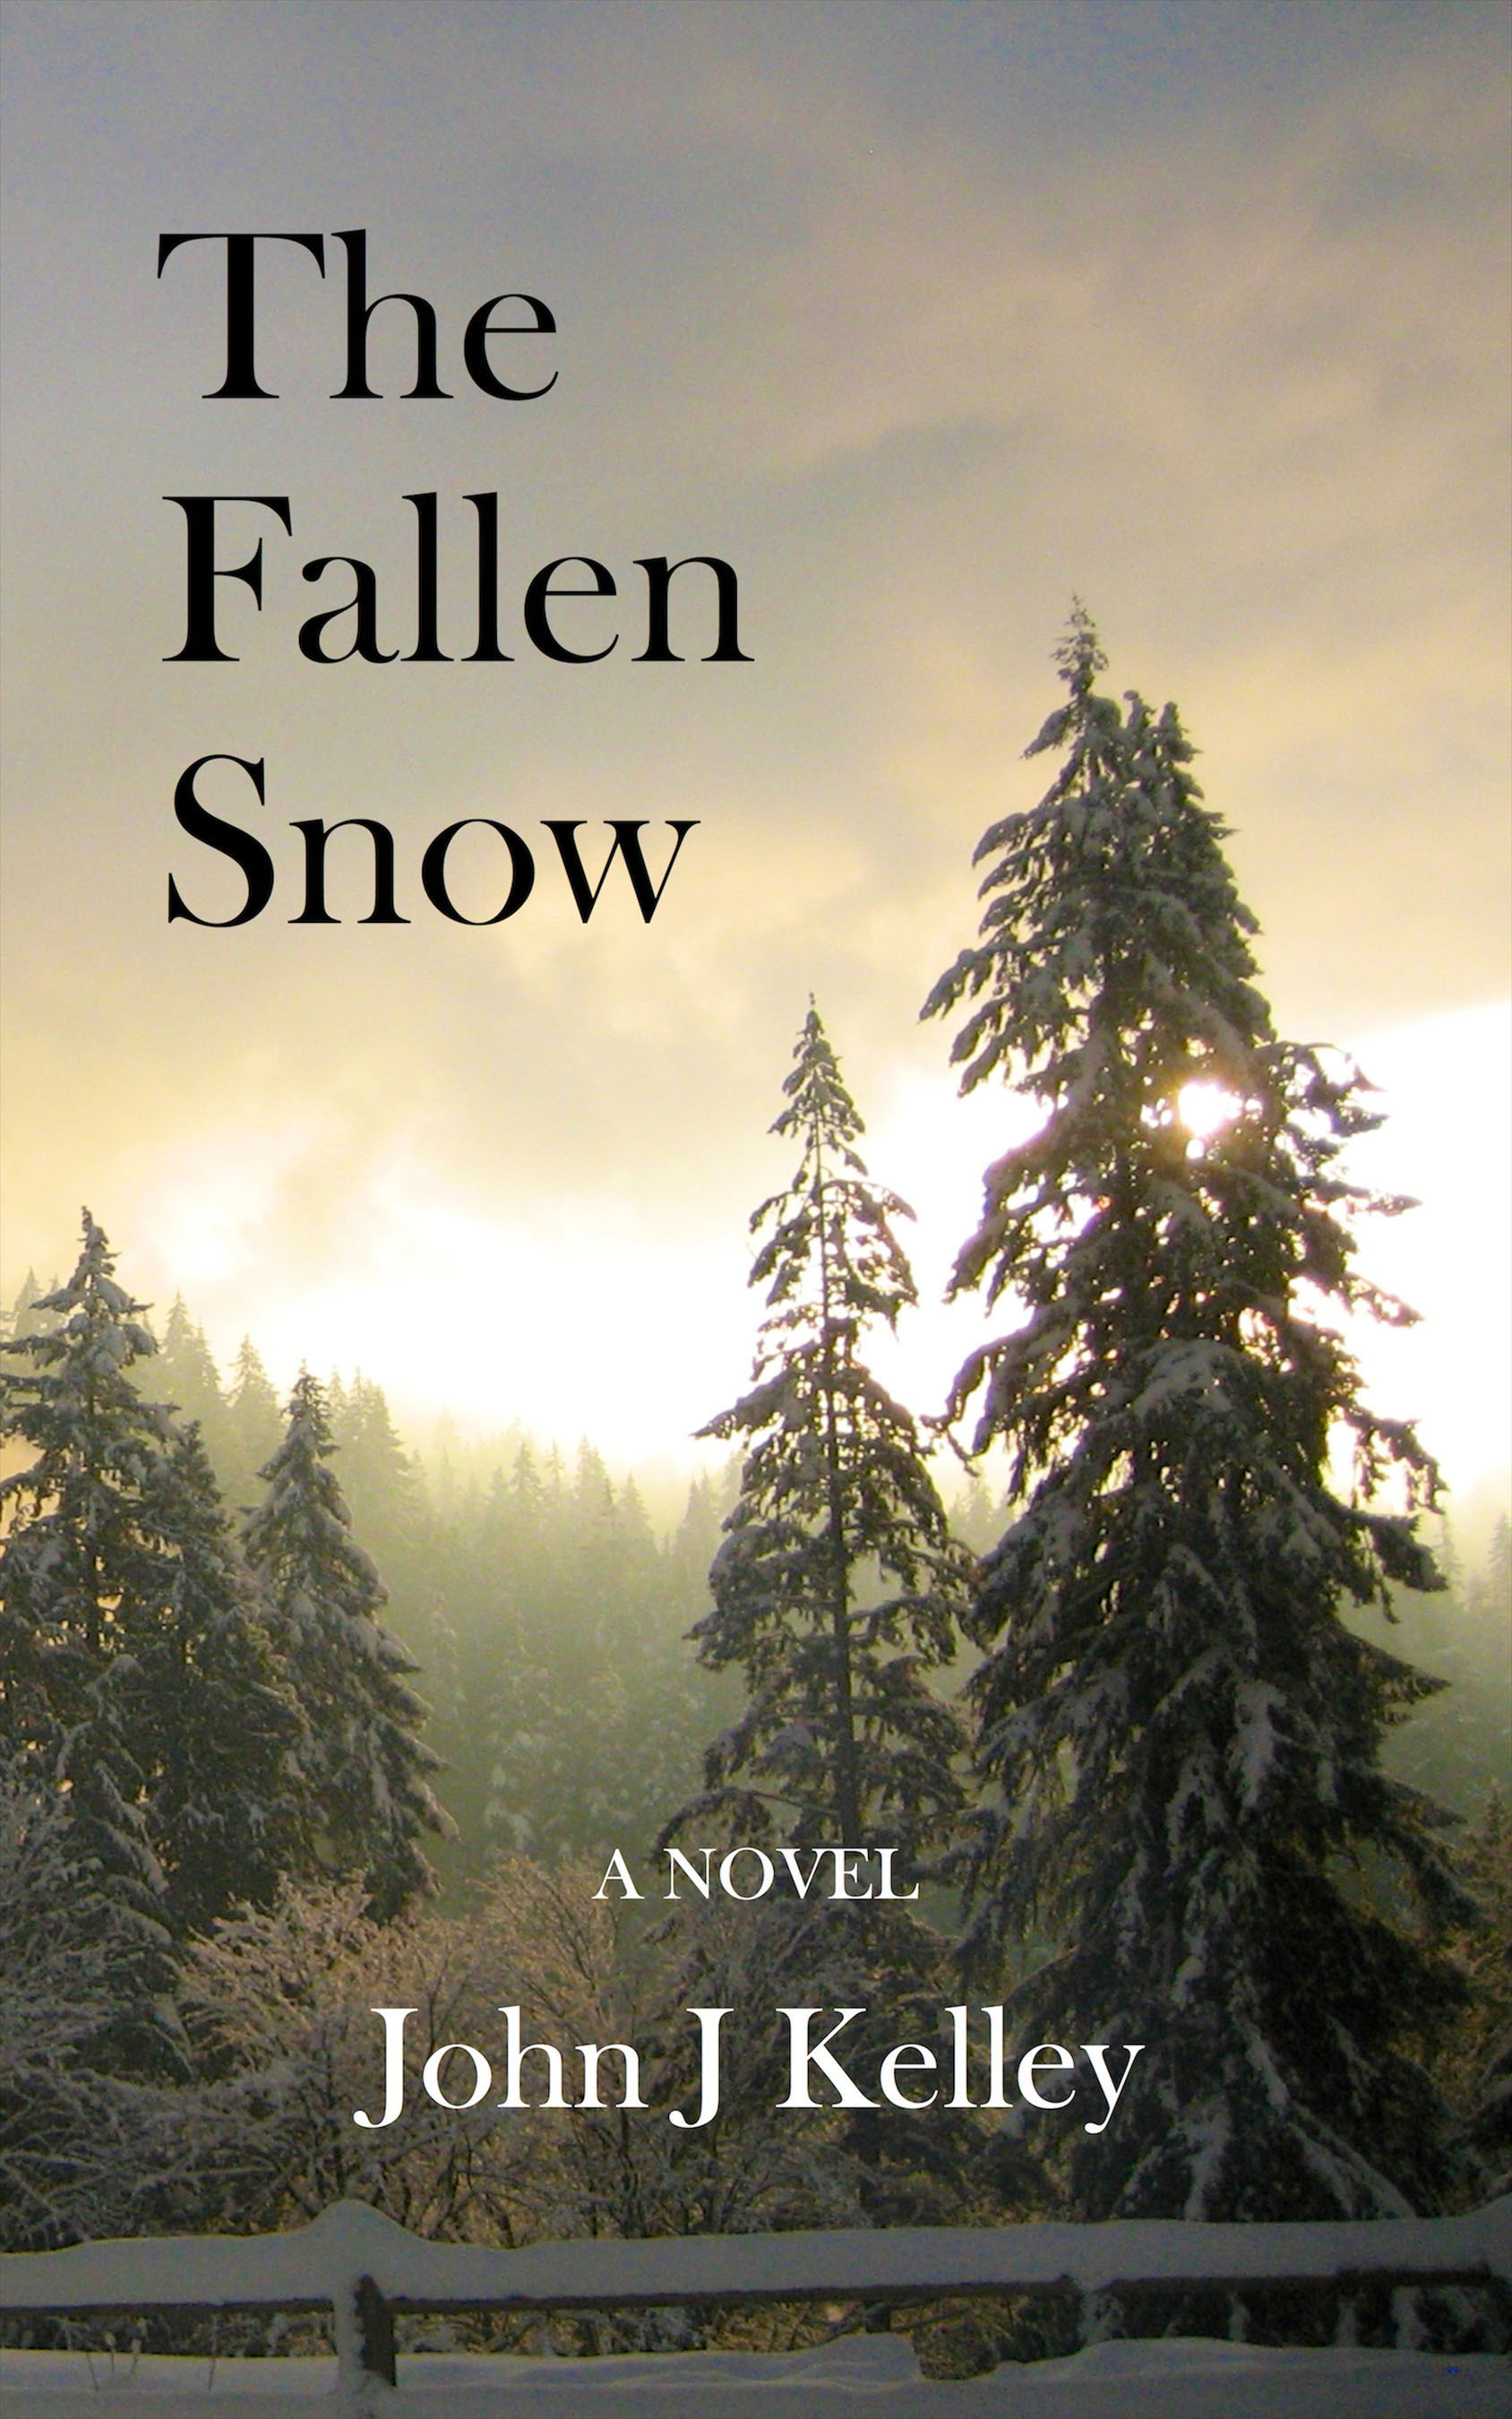 The Fallen Snow, by DC author John J Kelley, explores the difficult return of a young soldier to rural Virginia at the close of World War I. The novel is available in paperback and Kindle editions at Amazon.com. (PRNewsFoto/Stone Cabin Press) (PRNewsFoto/STONE CABIN PRESS)